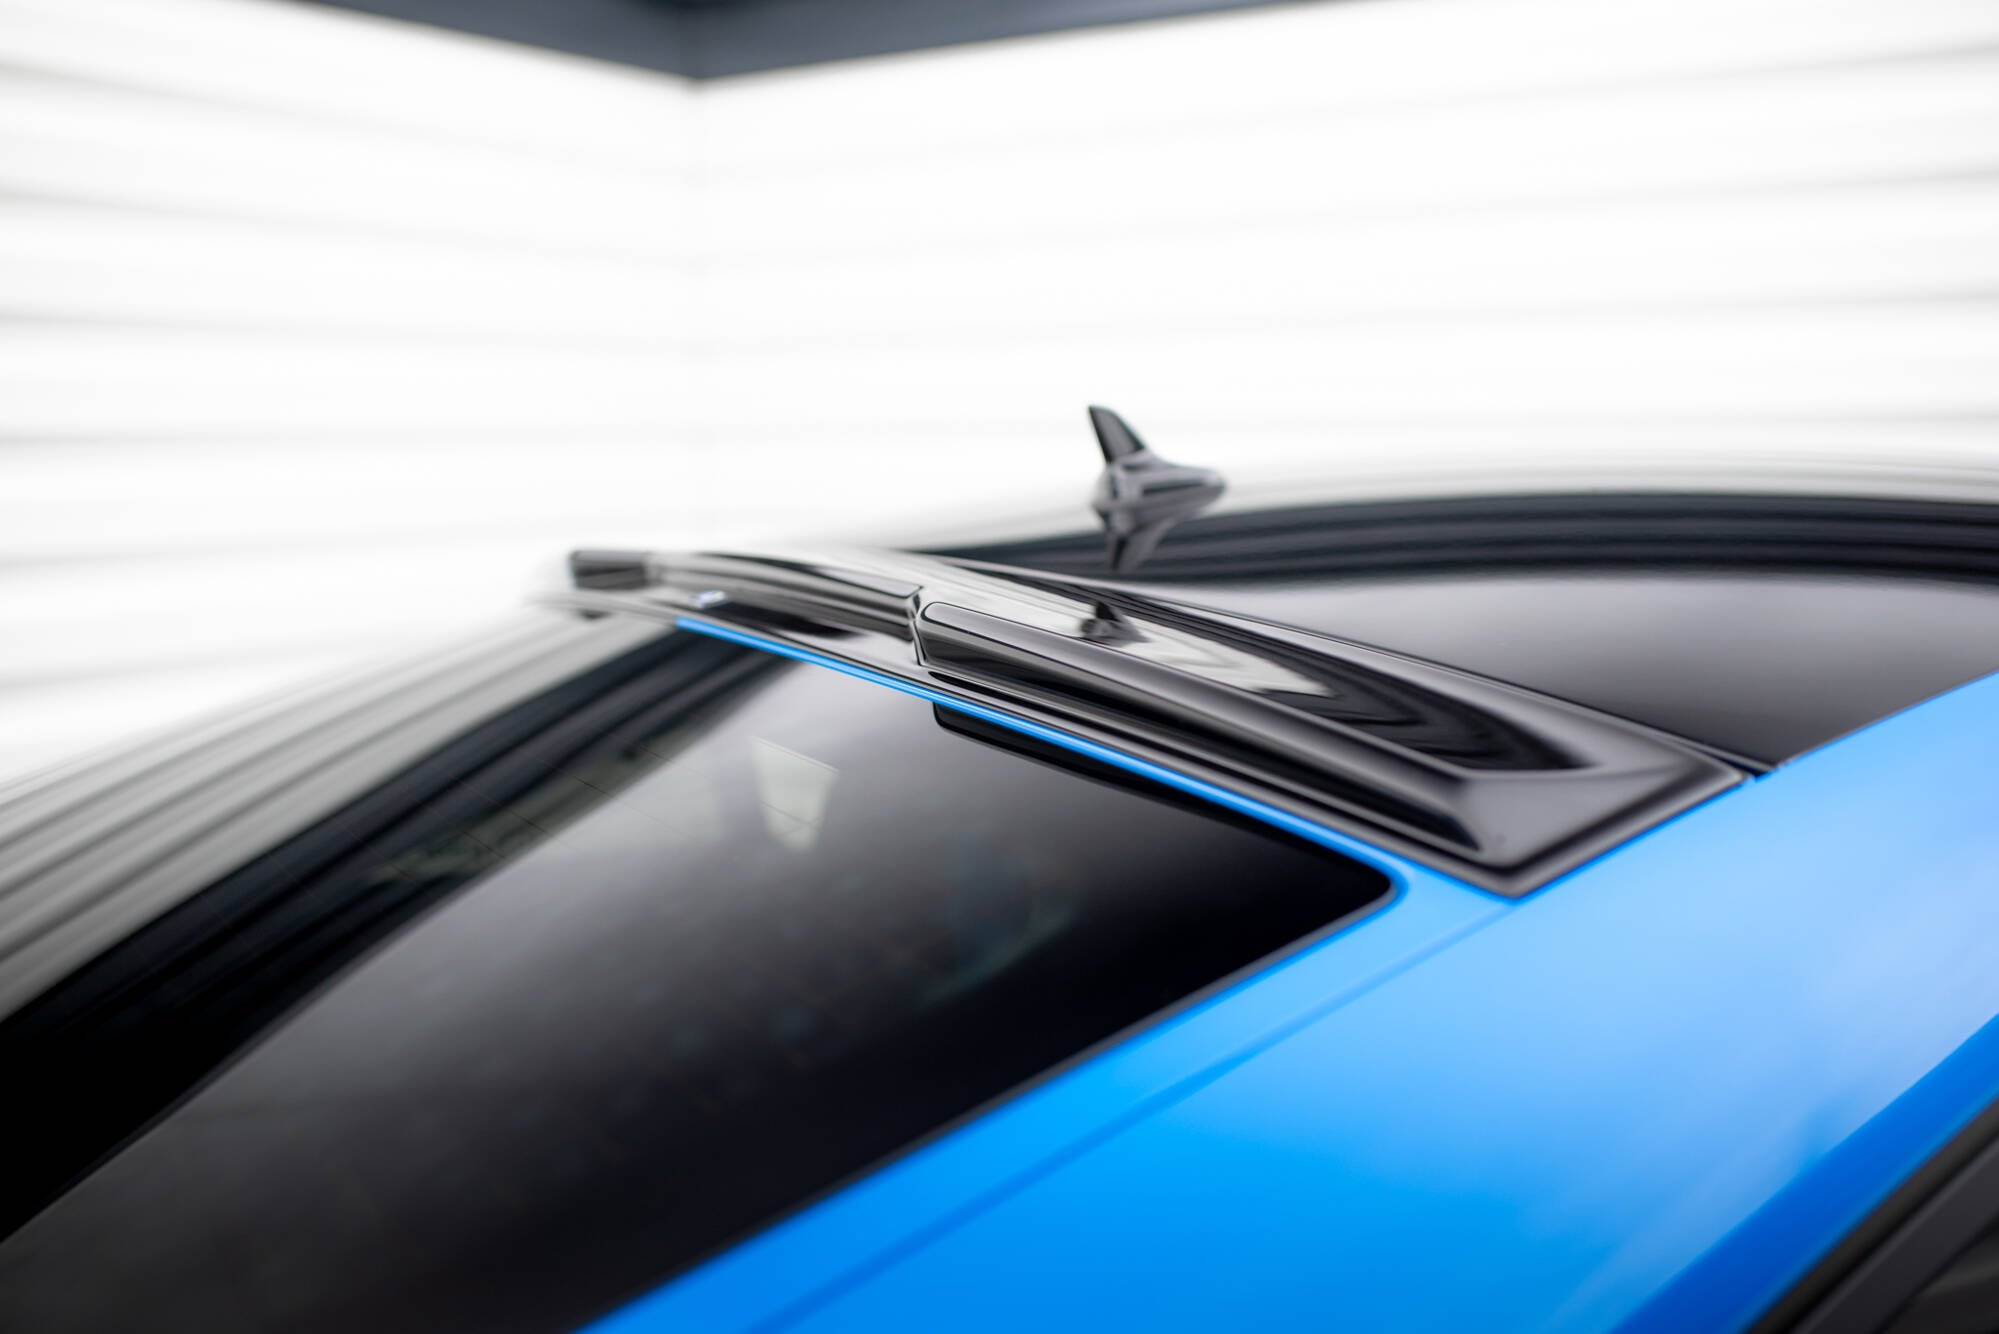 The extension of the rear window Audi TT S 8S Facelift